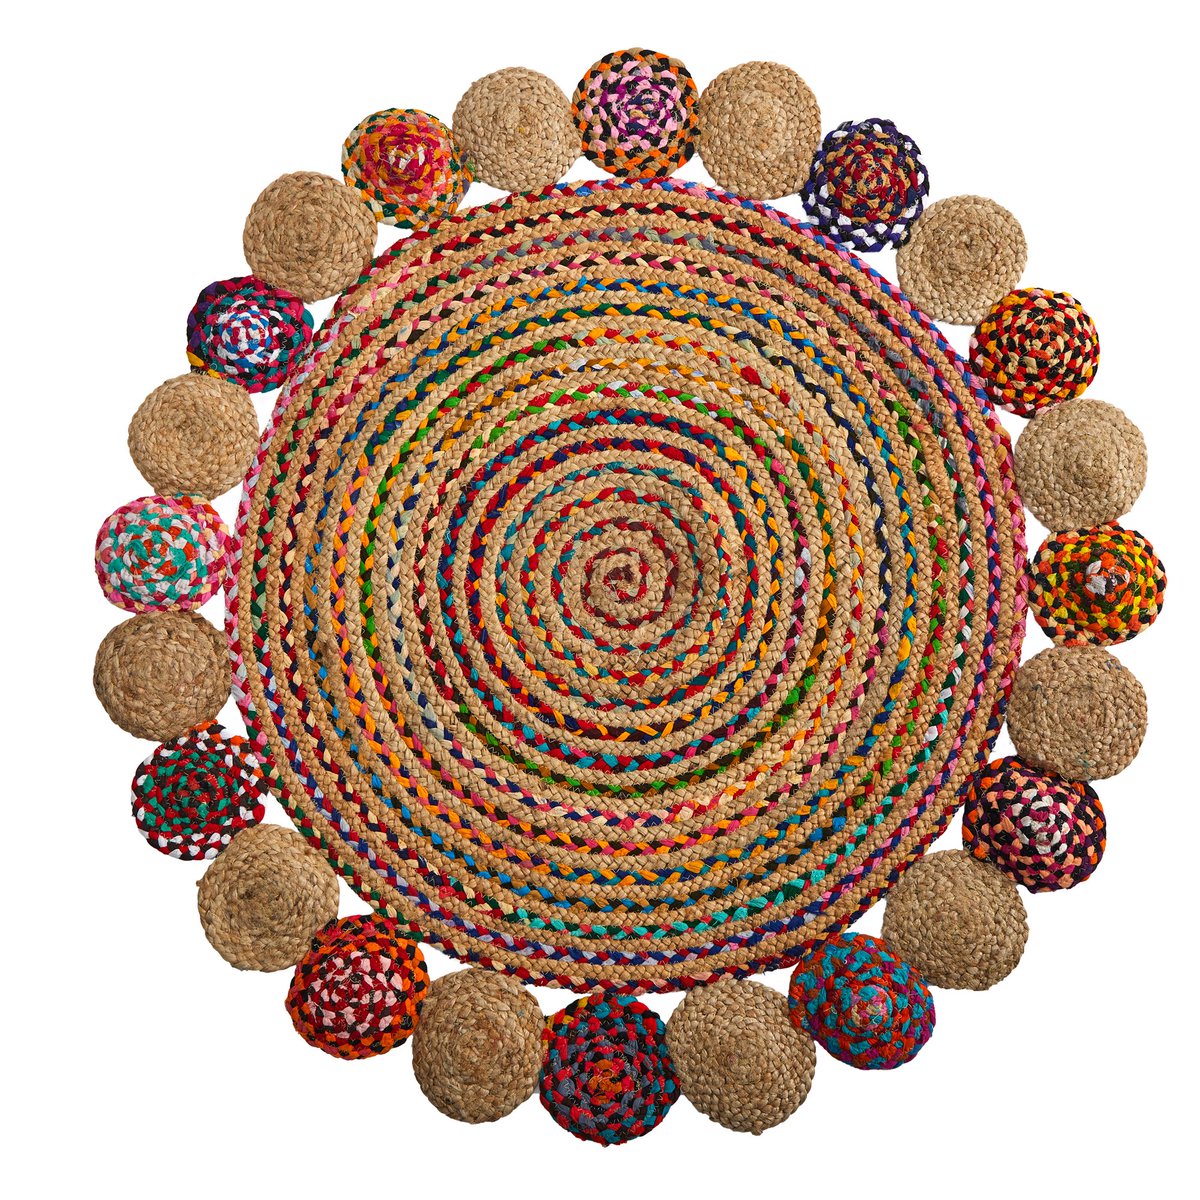 This hand braided boho Mandala round rug adds an organic touch to any space! Come and check this out! casanovadesigns.com/products/view/… #homedecor #interiordesign #home #interior #design #homedesign #decoration #furniture #interiors #homedecoration #interiorstyling #livingroom #style